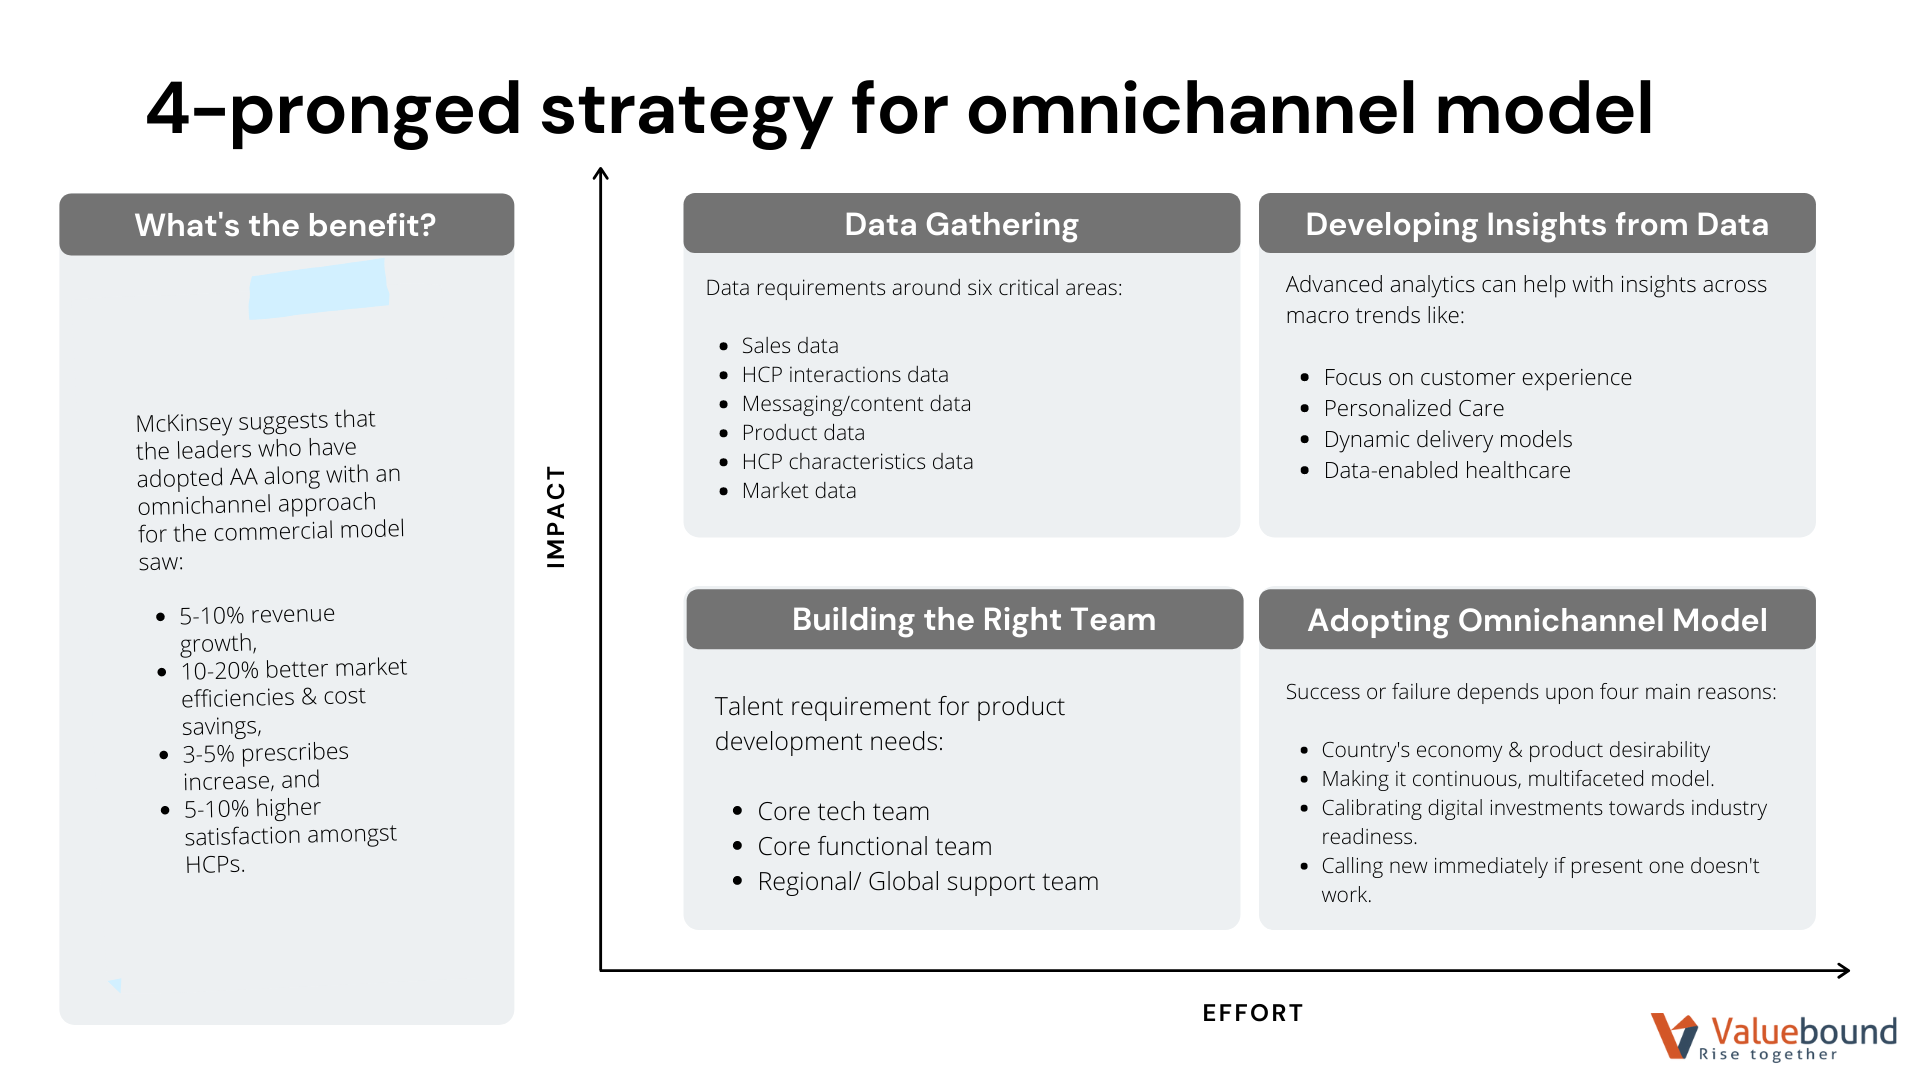 4-pronged strategy for omnichannel model